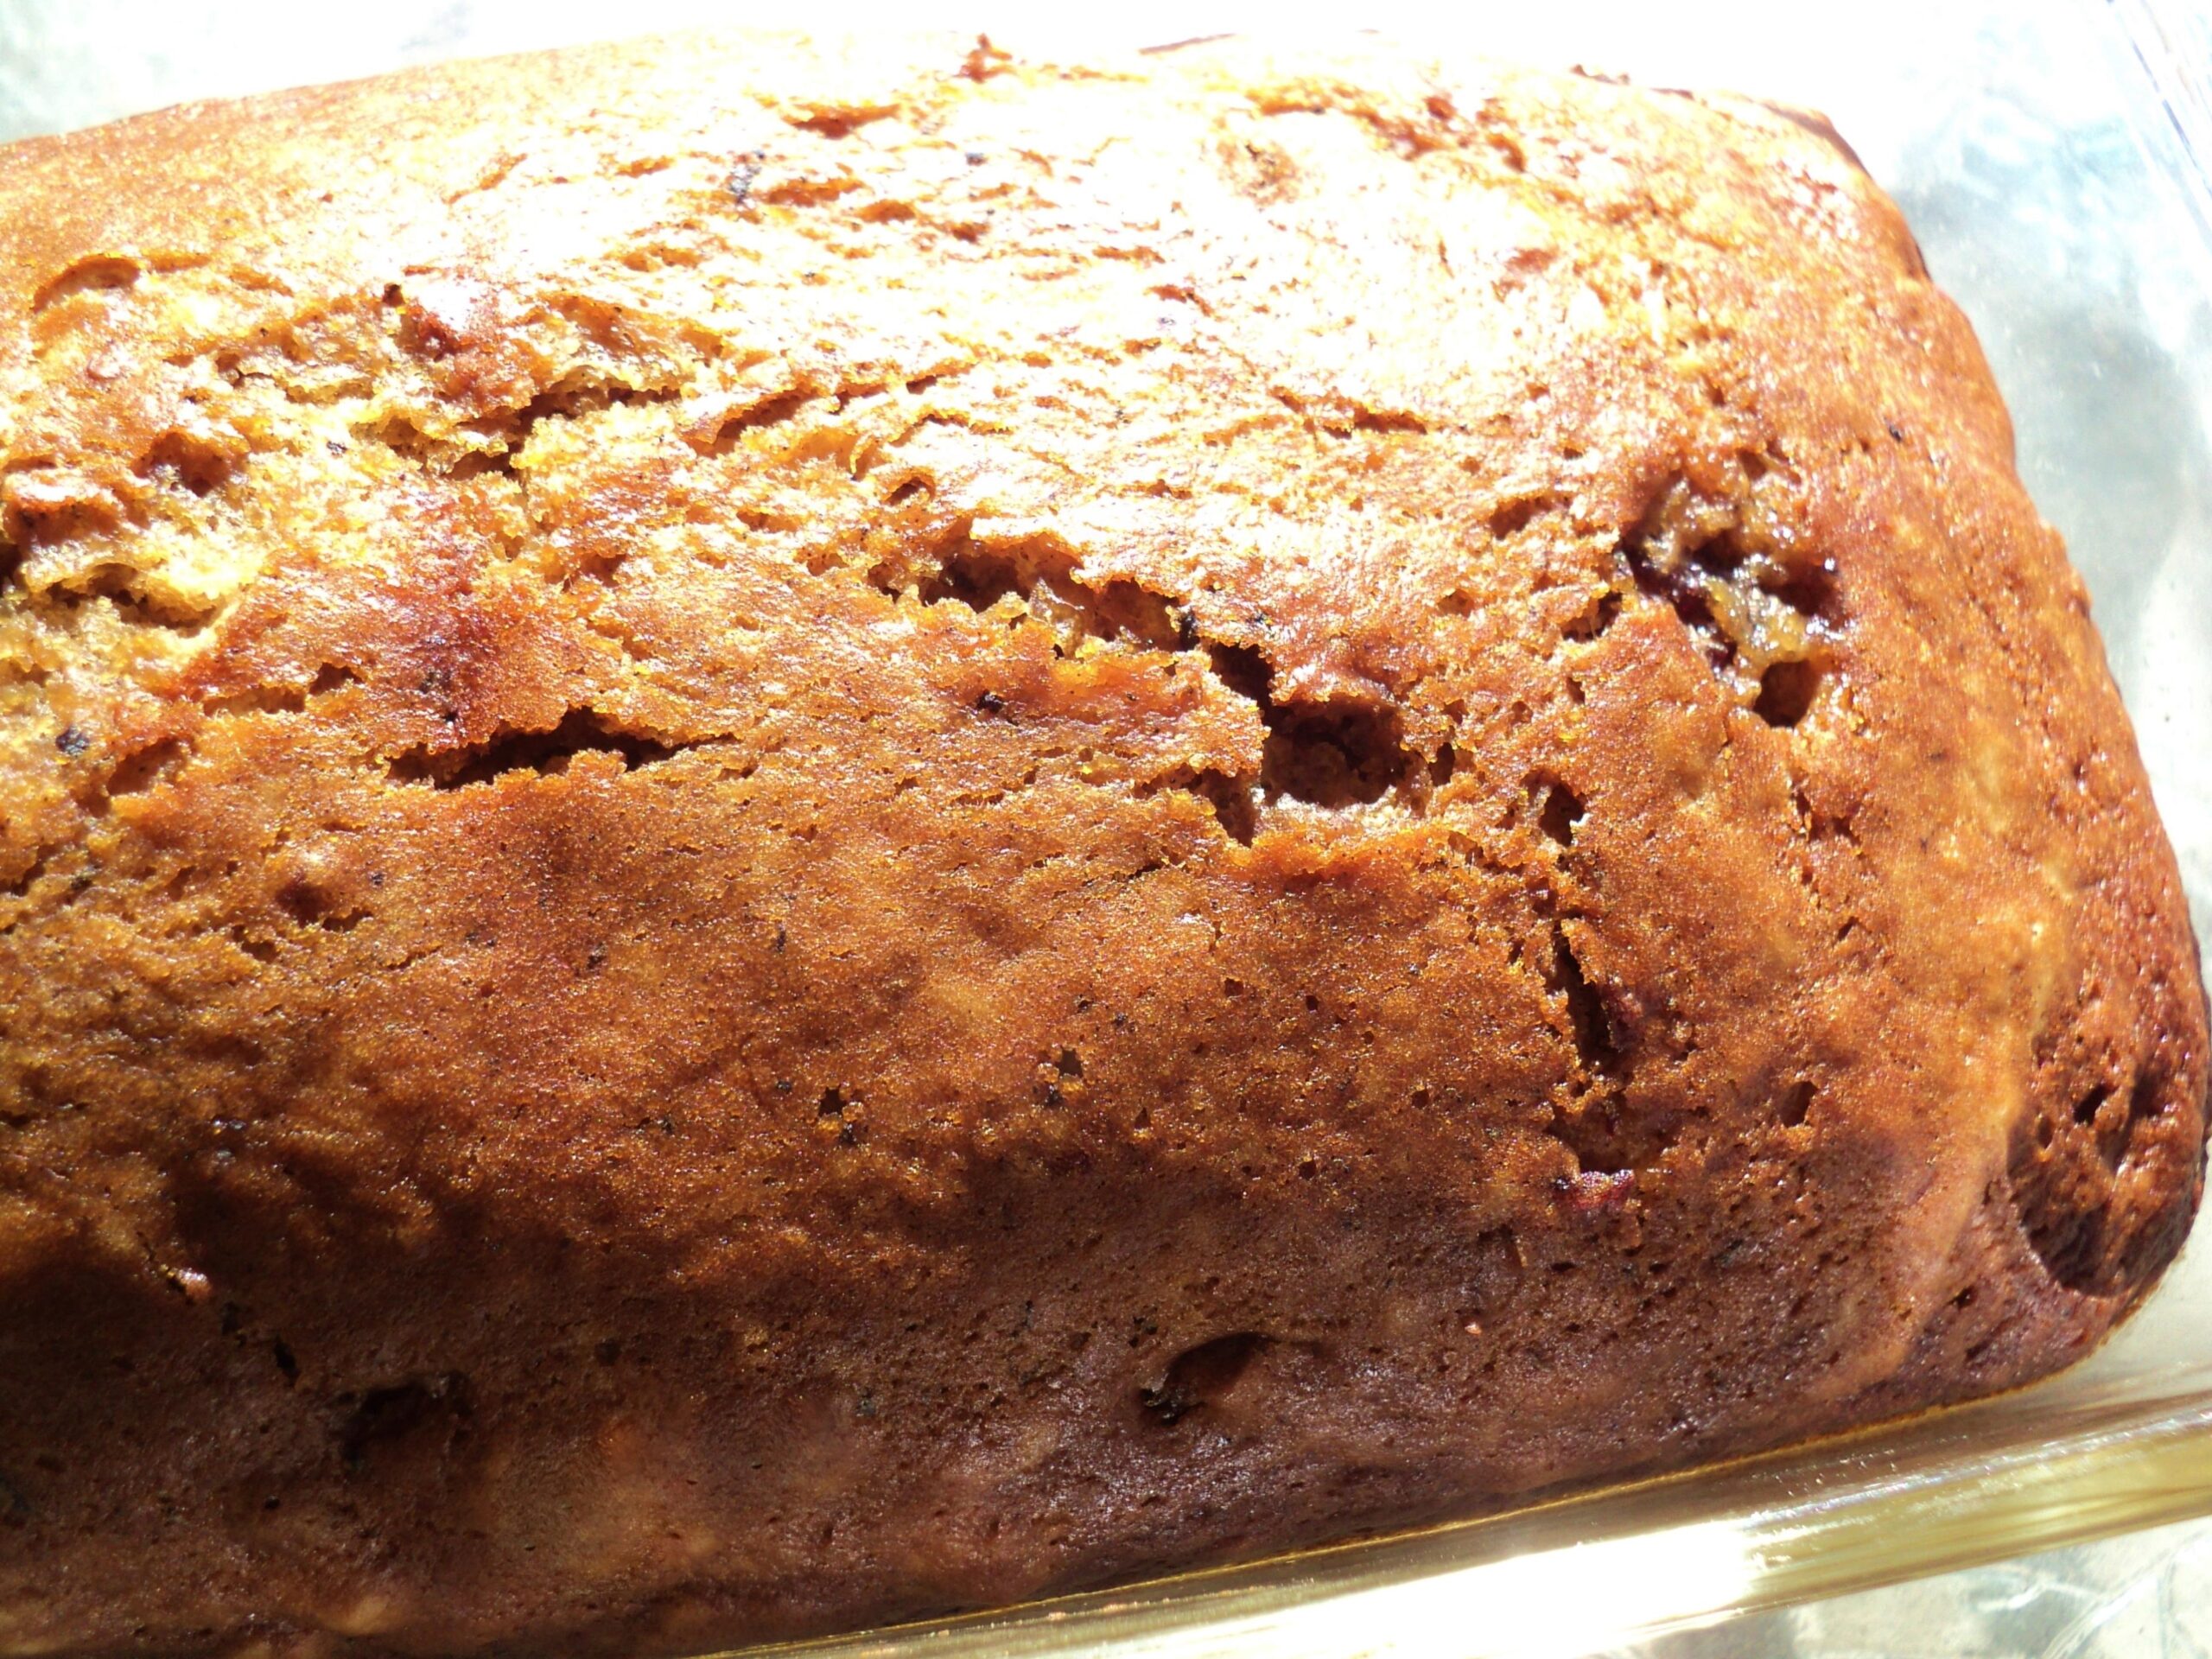  A slice of Coffee Date Bread is just the thing to start your morning right.